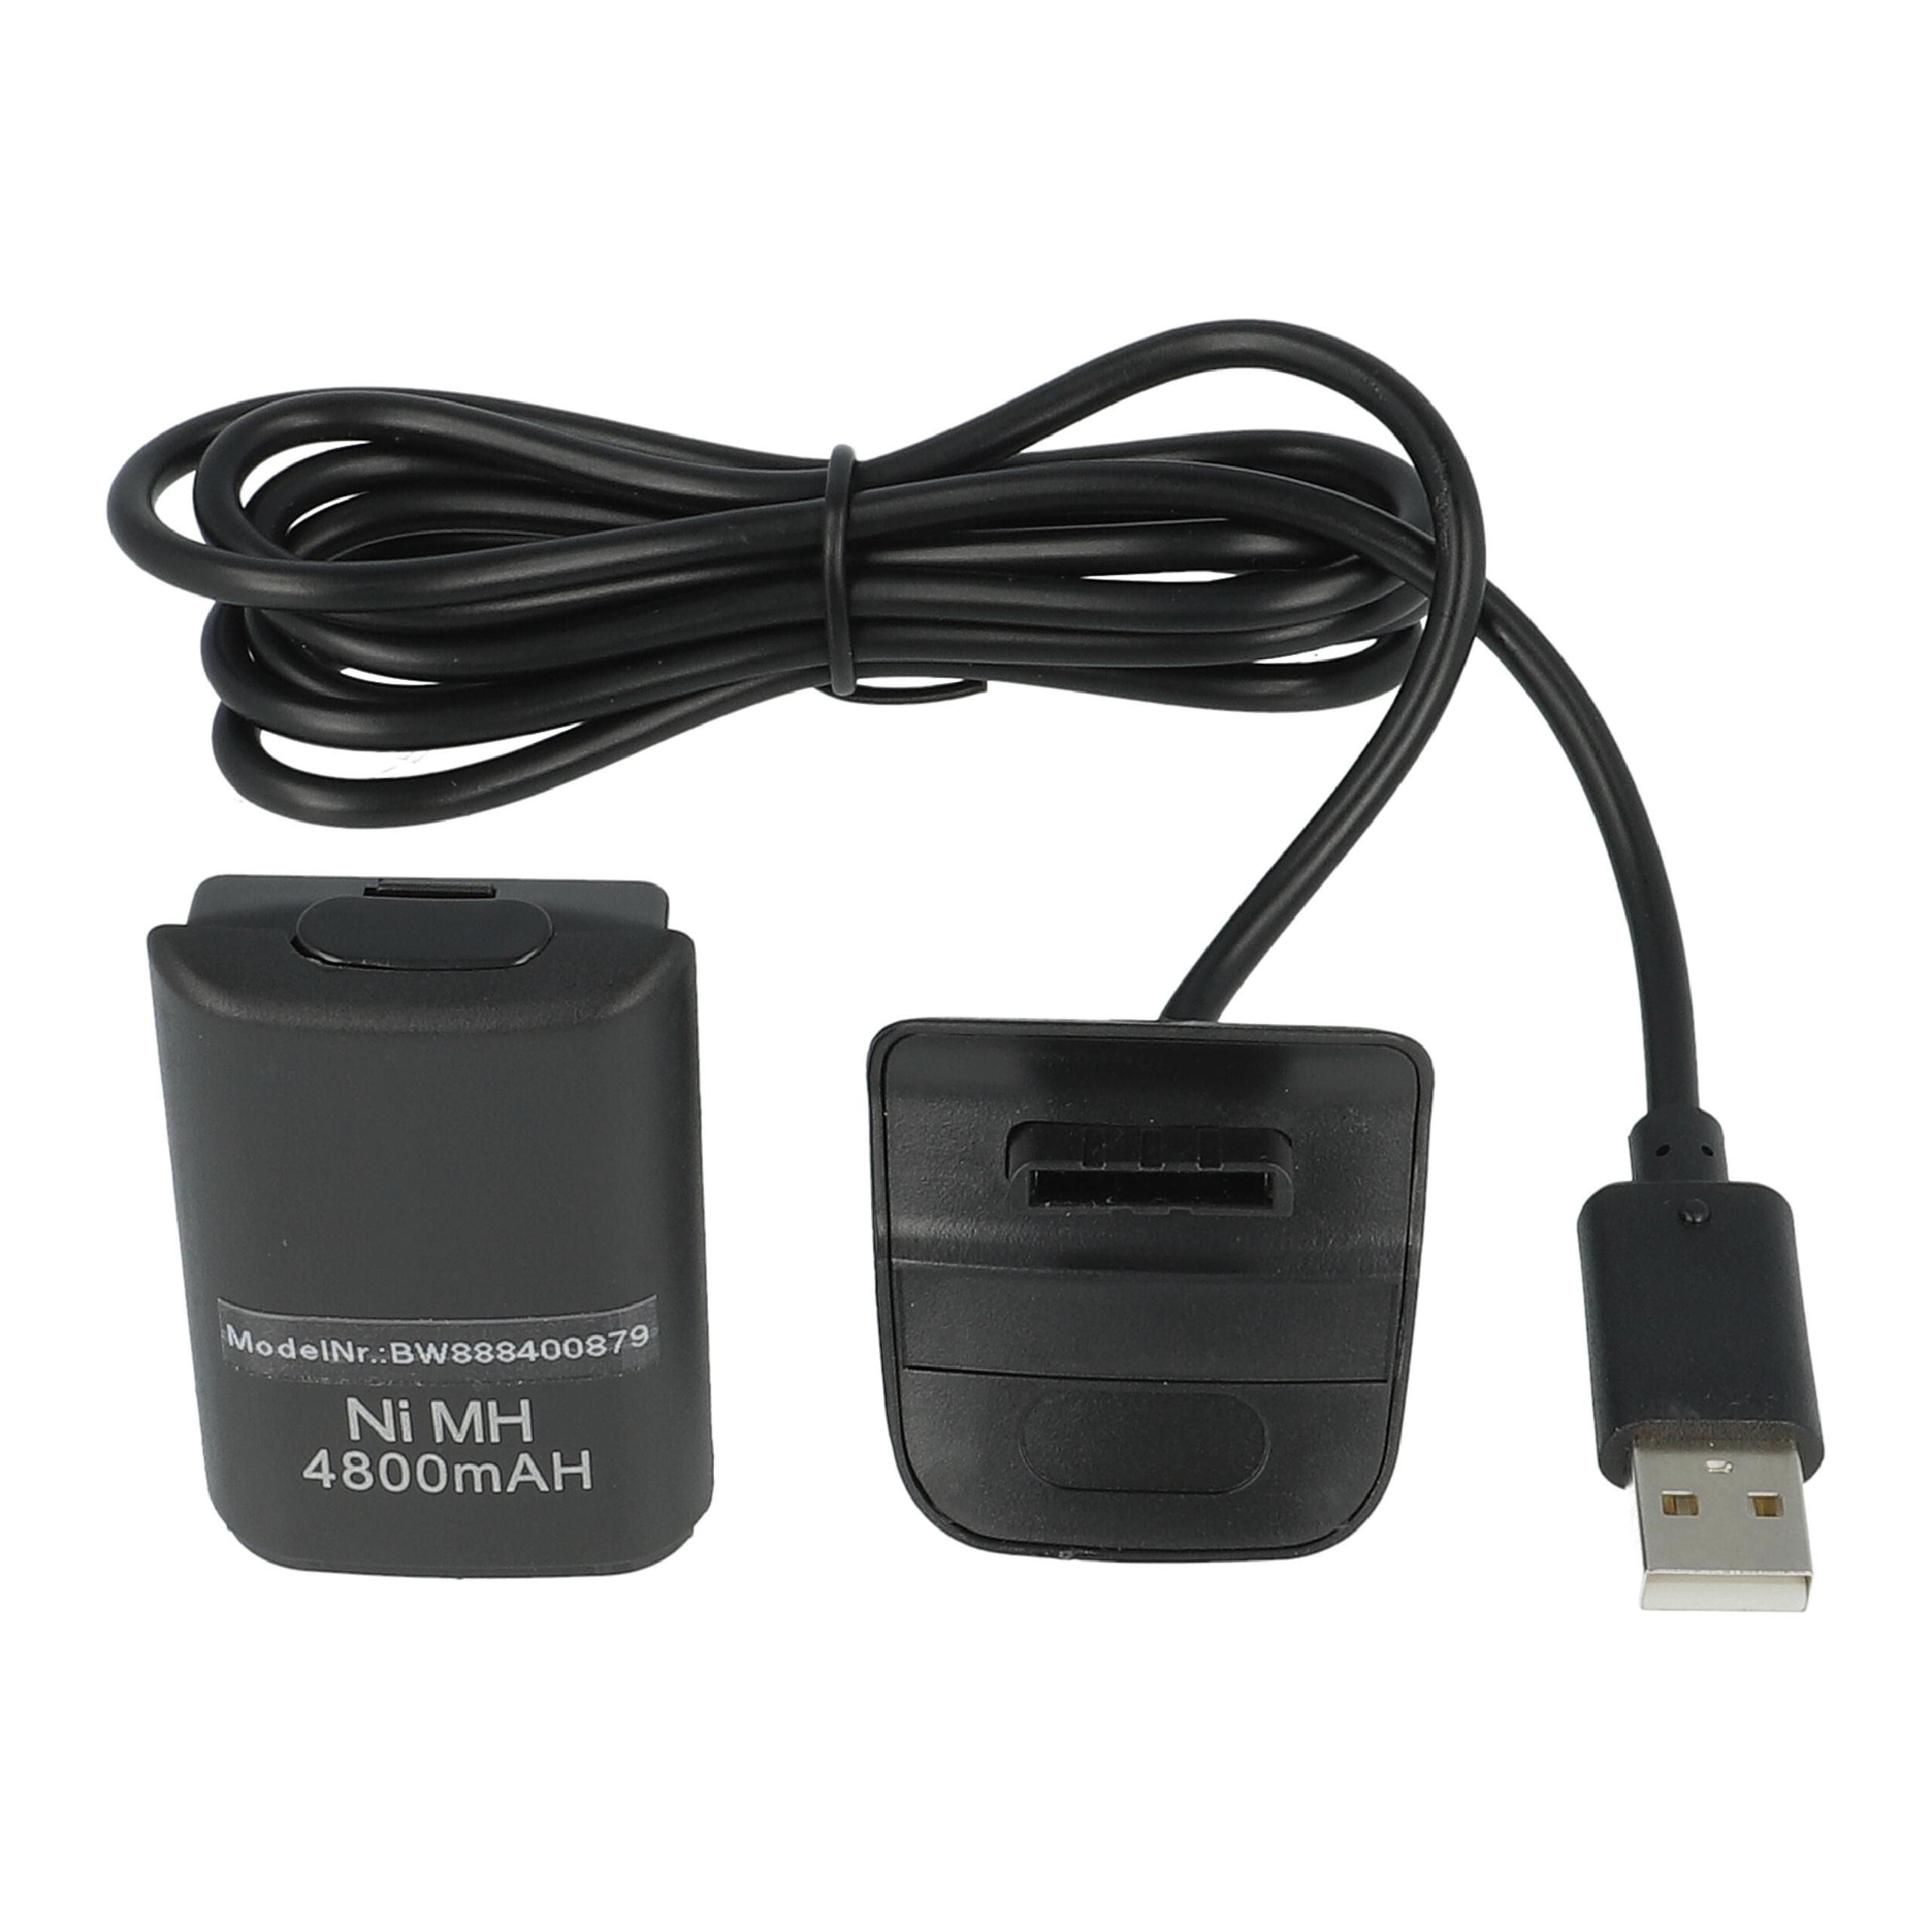 vhbw Play & Charge Kit - 1x battery, 1x charging cable Black